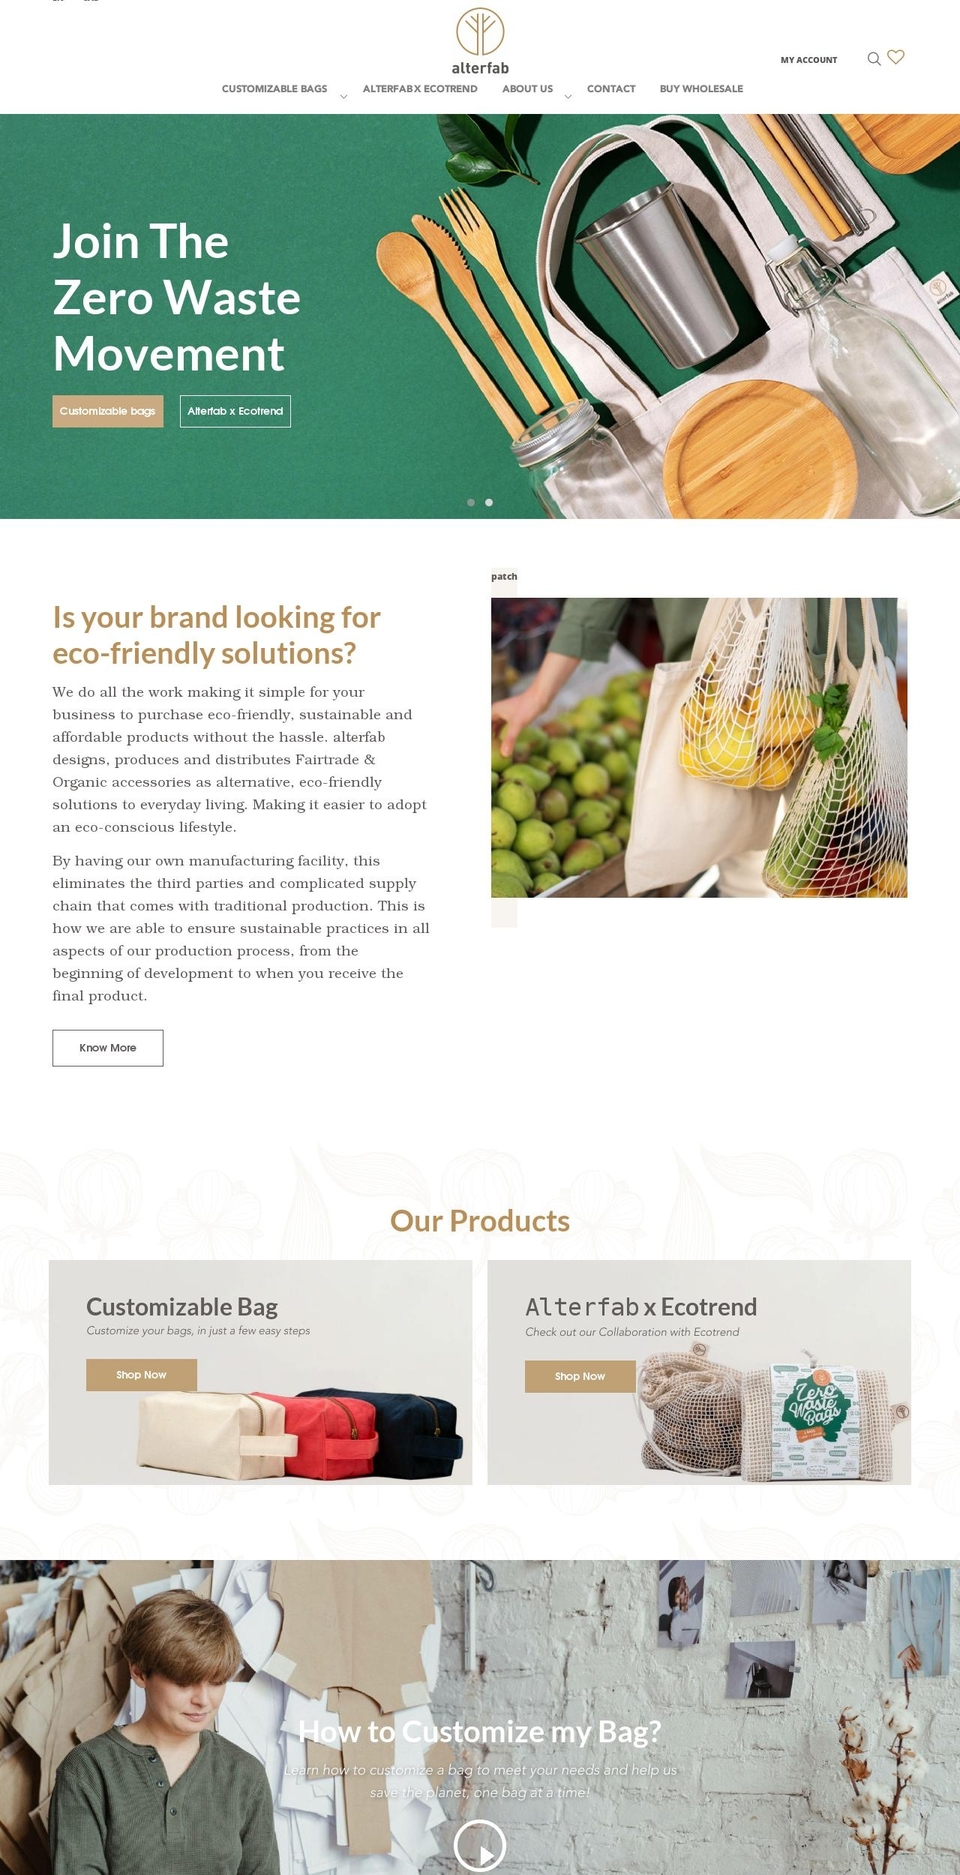 Goodwin Shopify theme site example alterfab.com